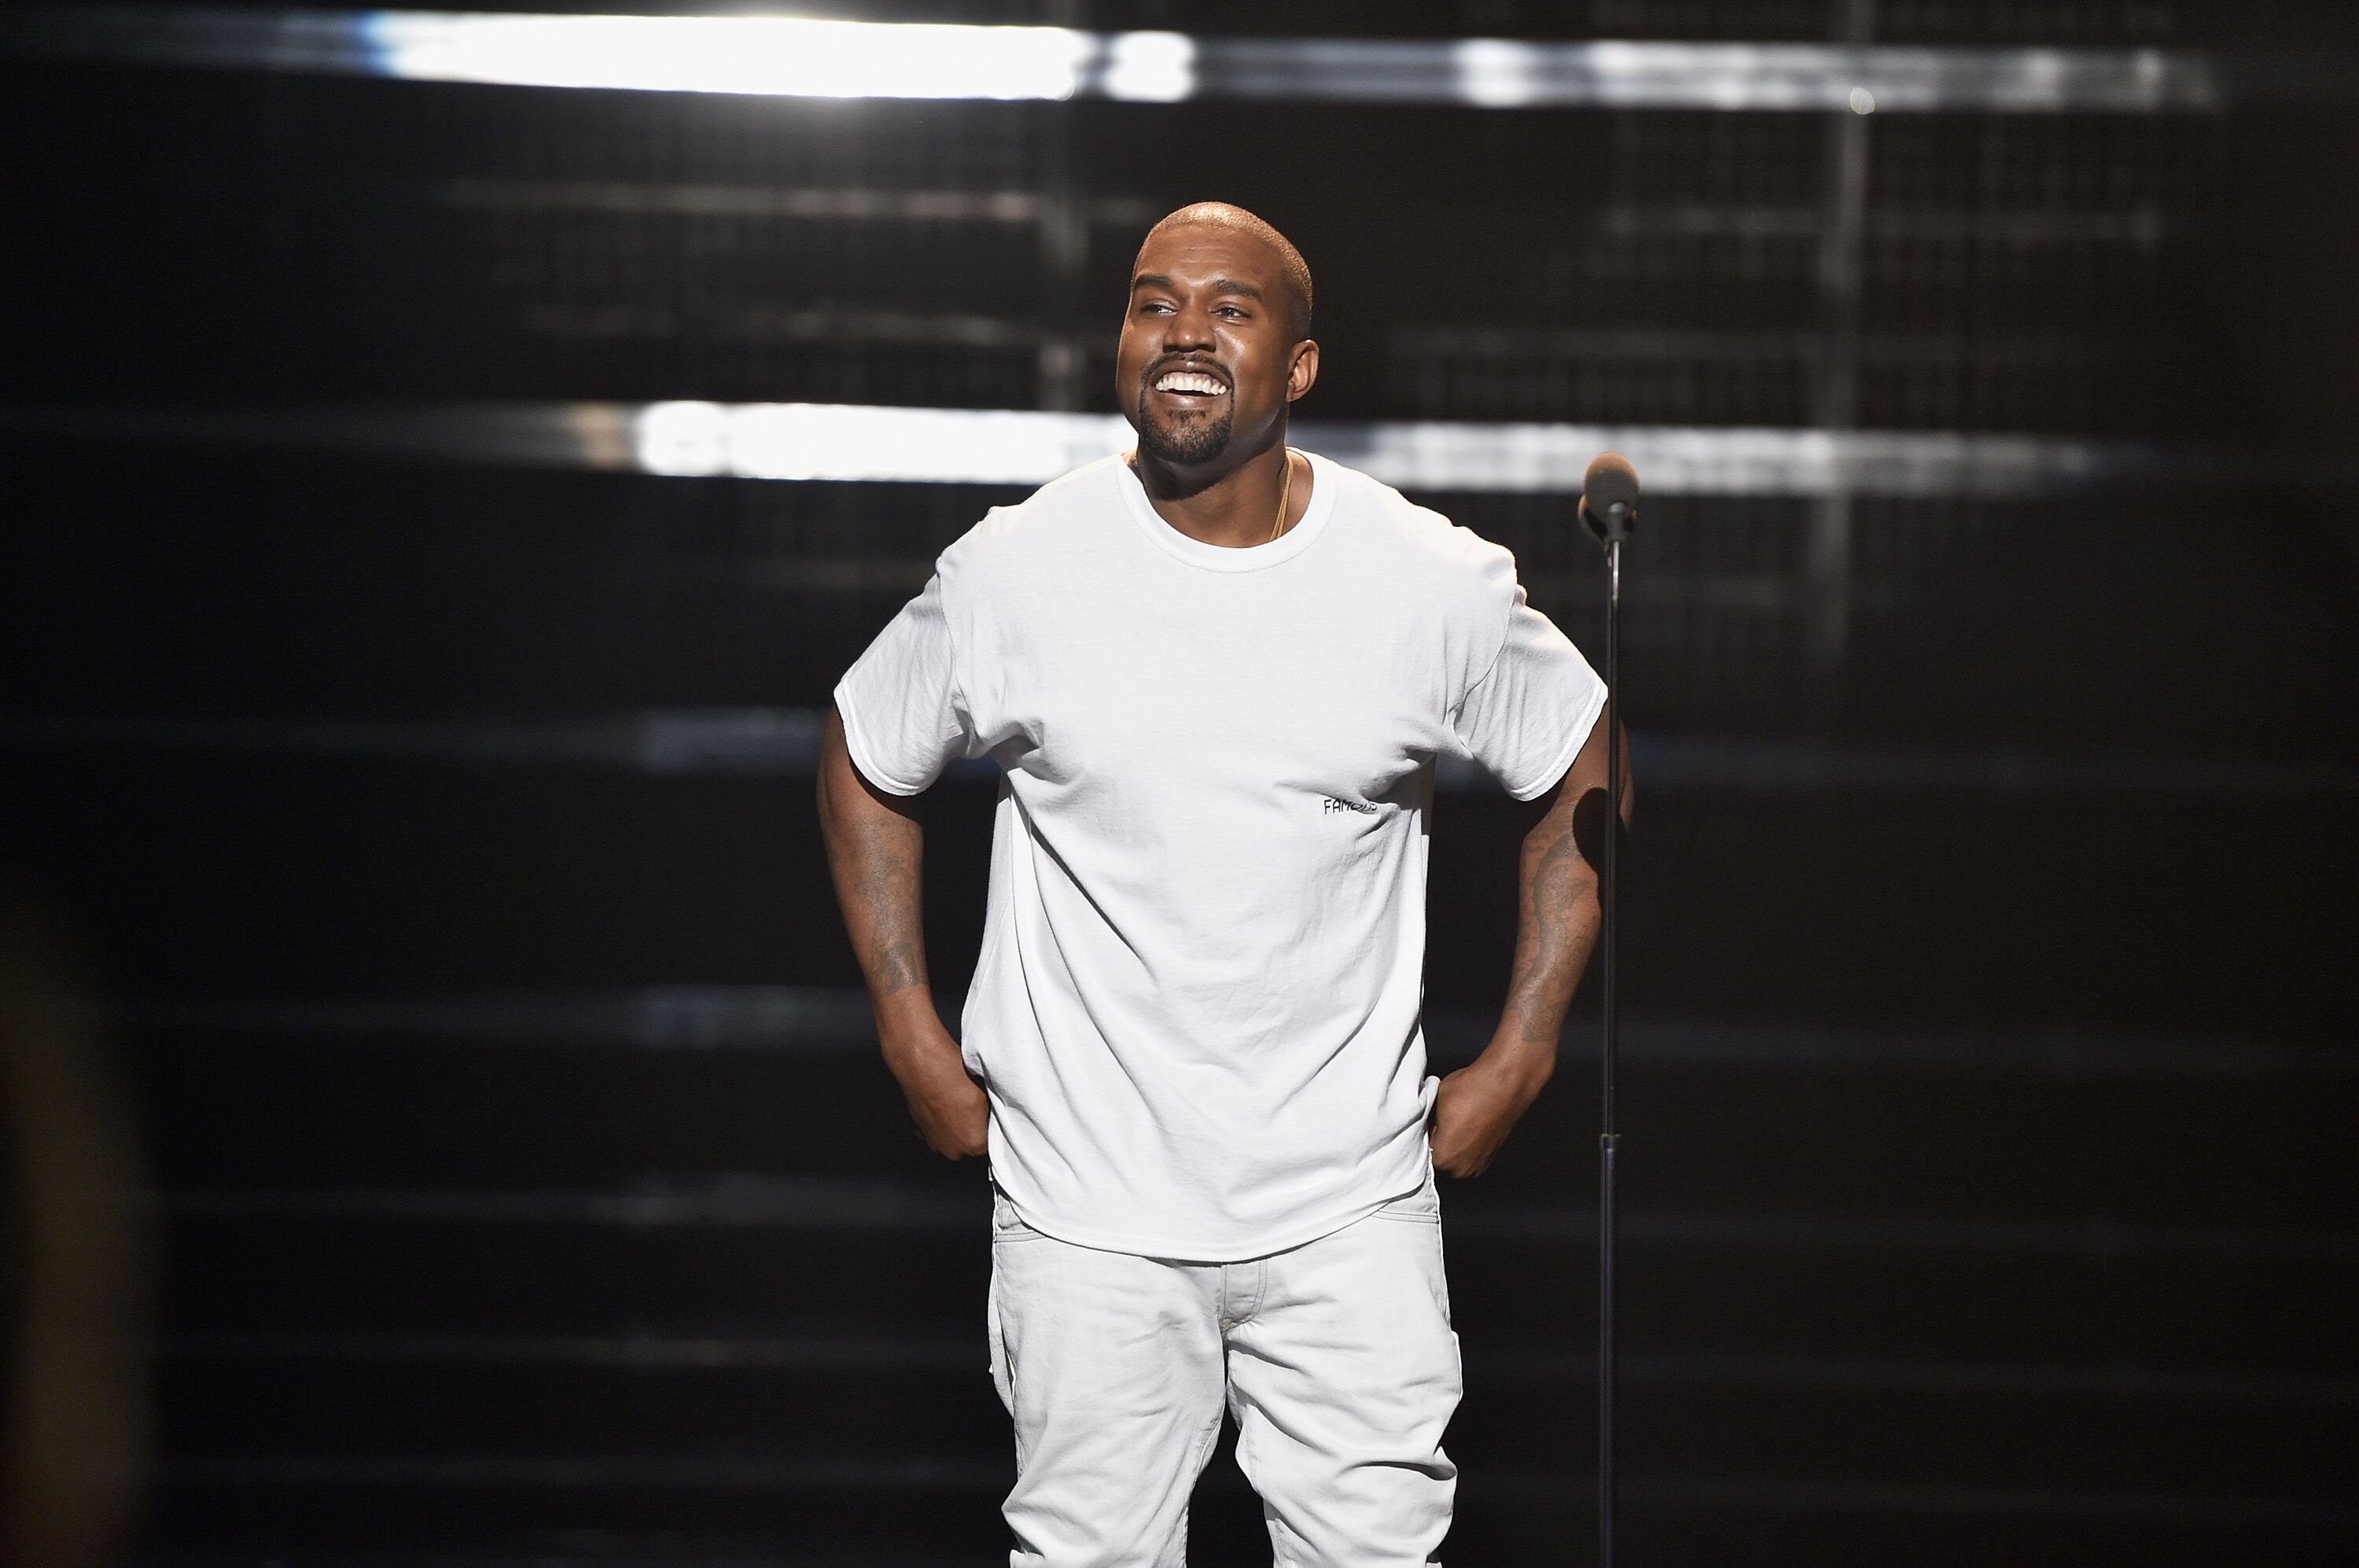 Kanye West dressed in all white | Source: Getty Images/GlobalImagesUkraine